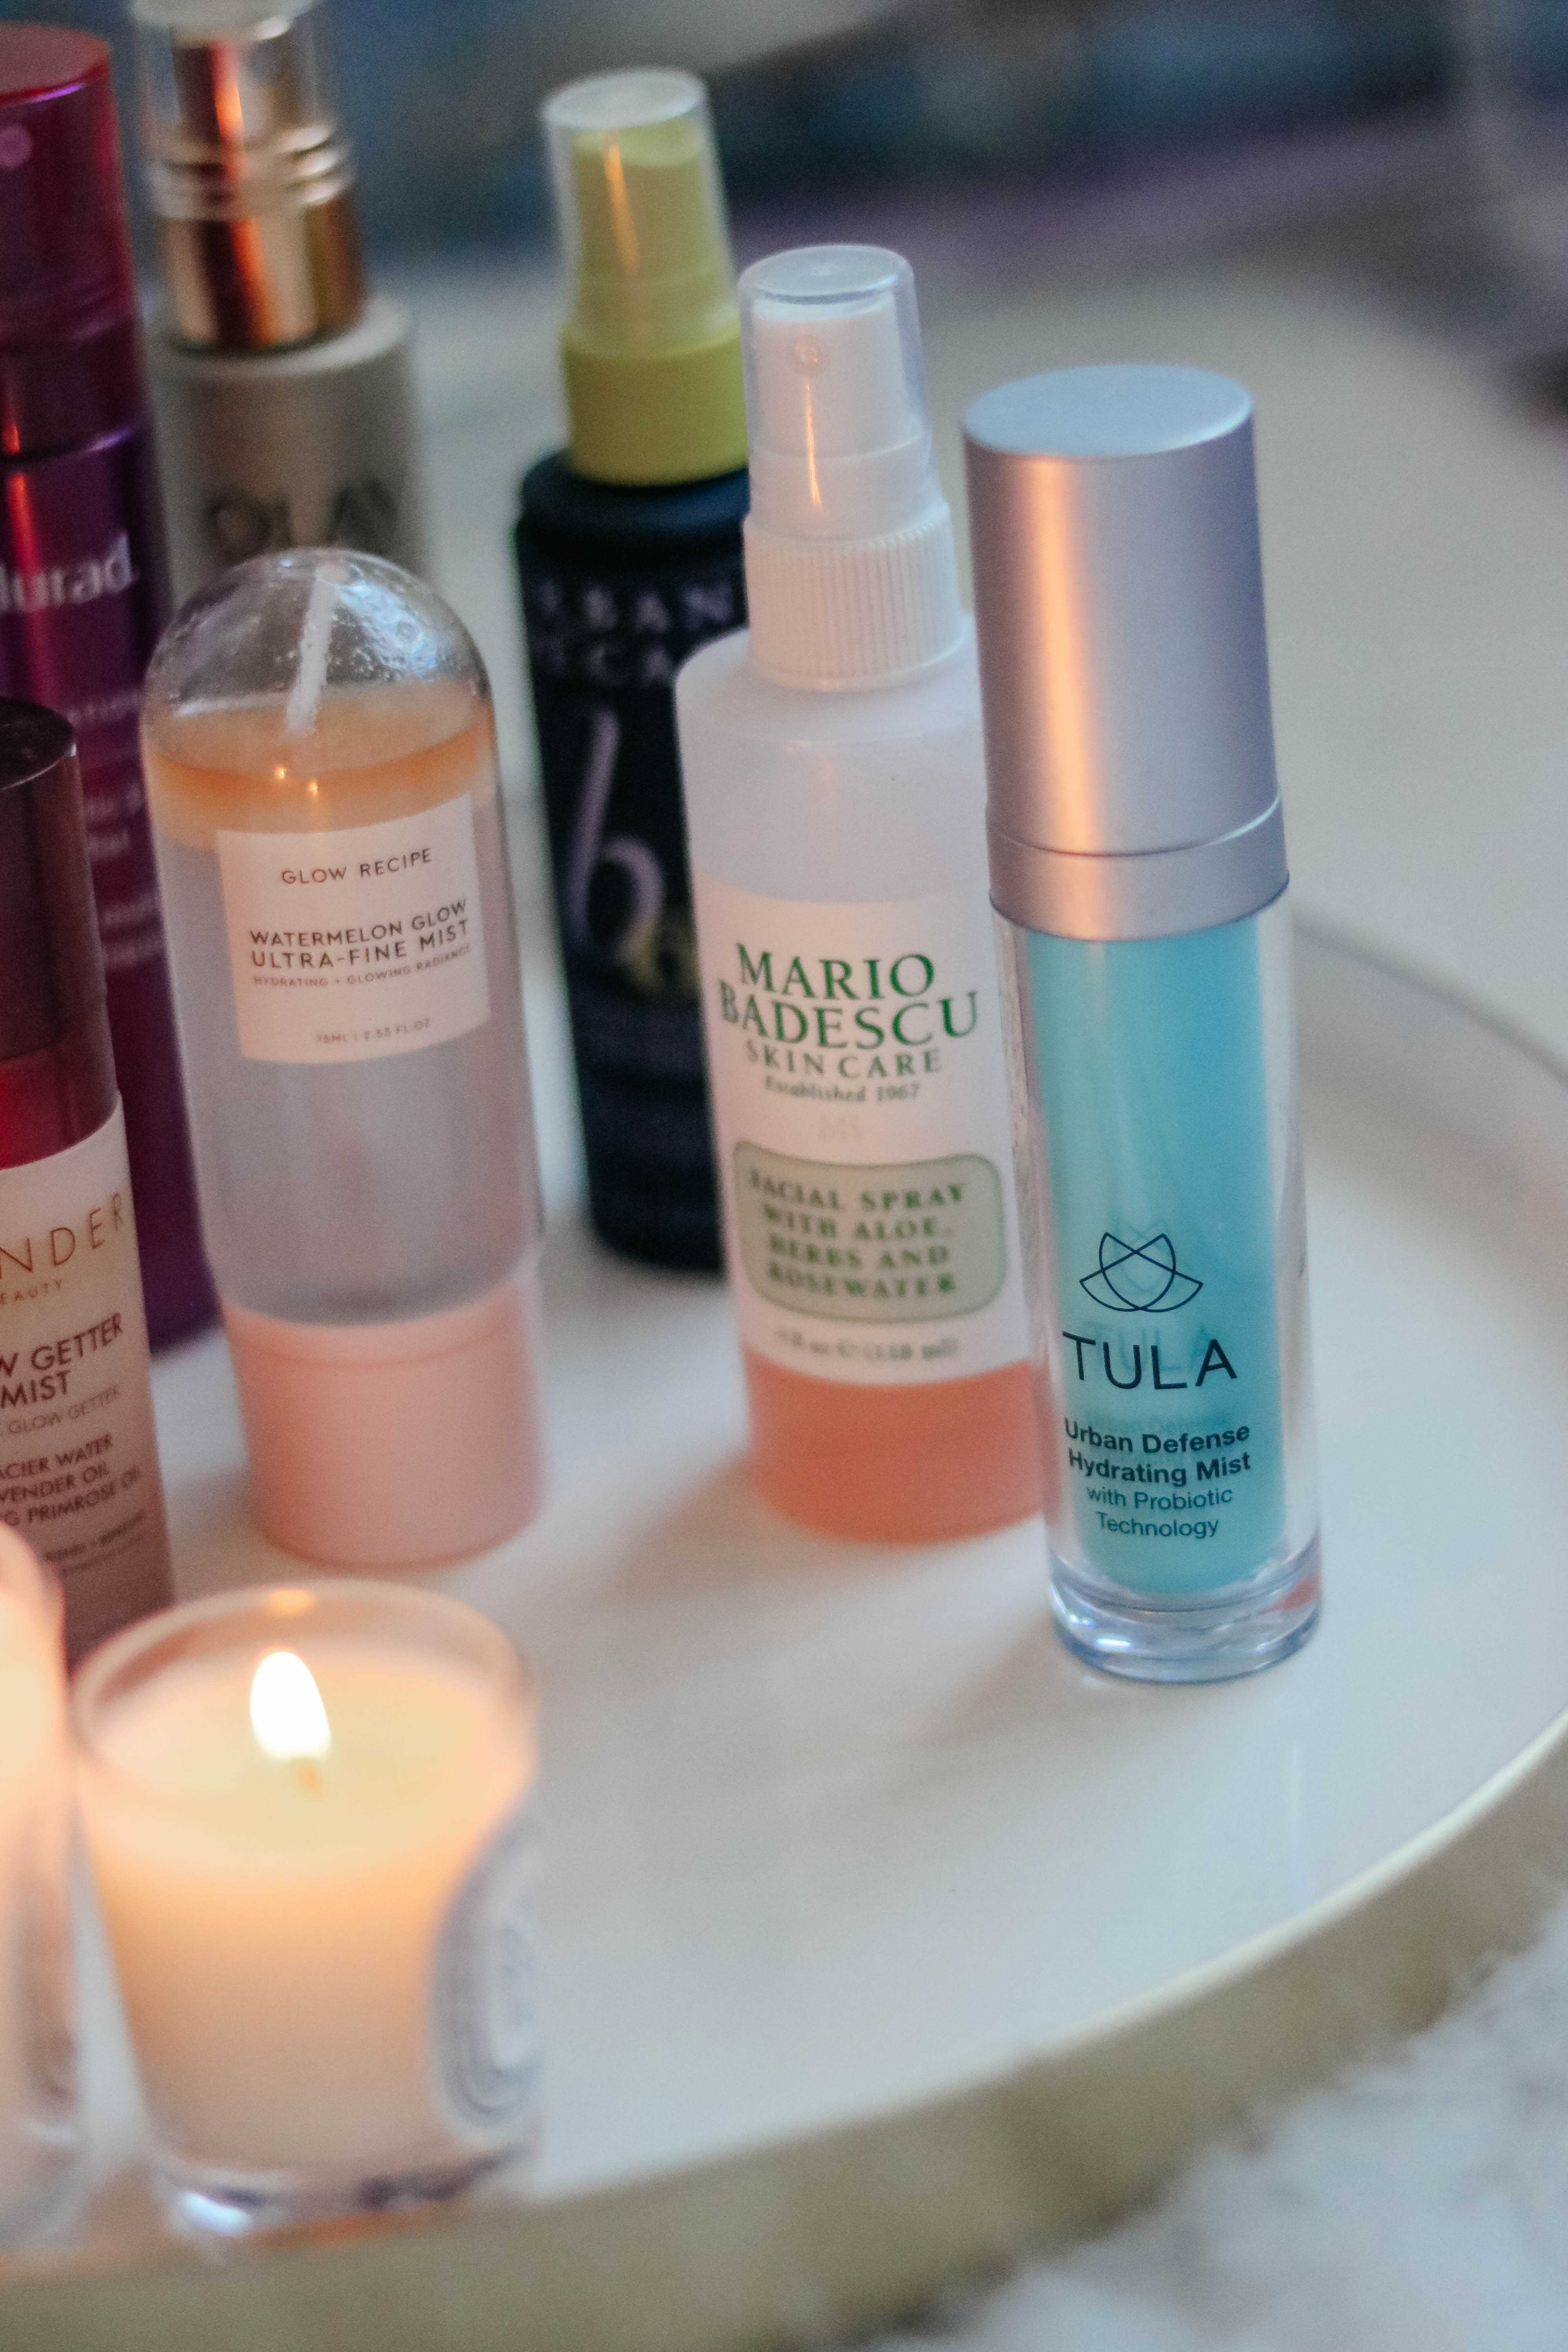 Are you on the Facial Sprays train yet? Sharing some favorite face mists and why you need them in your skincare routine!